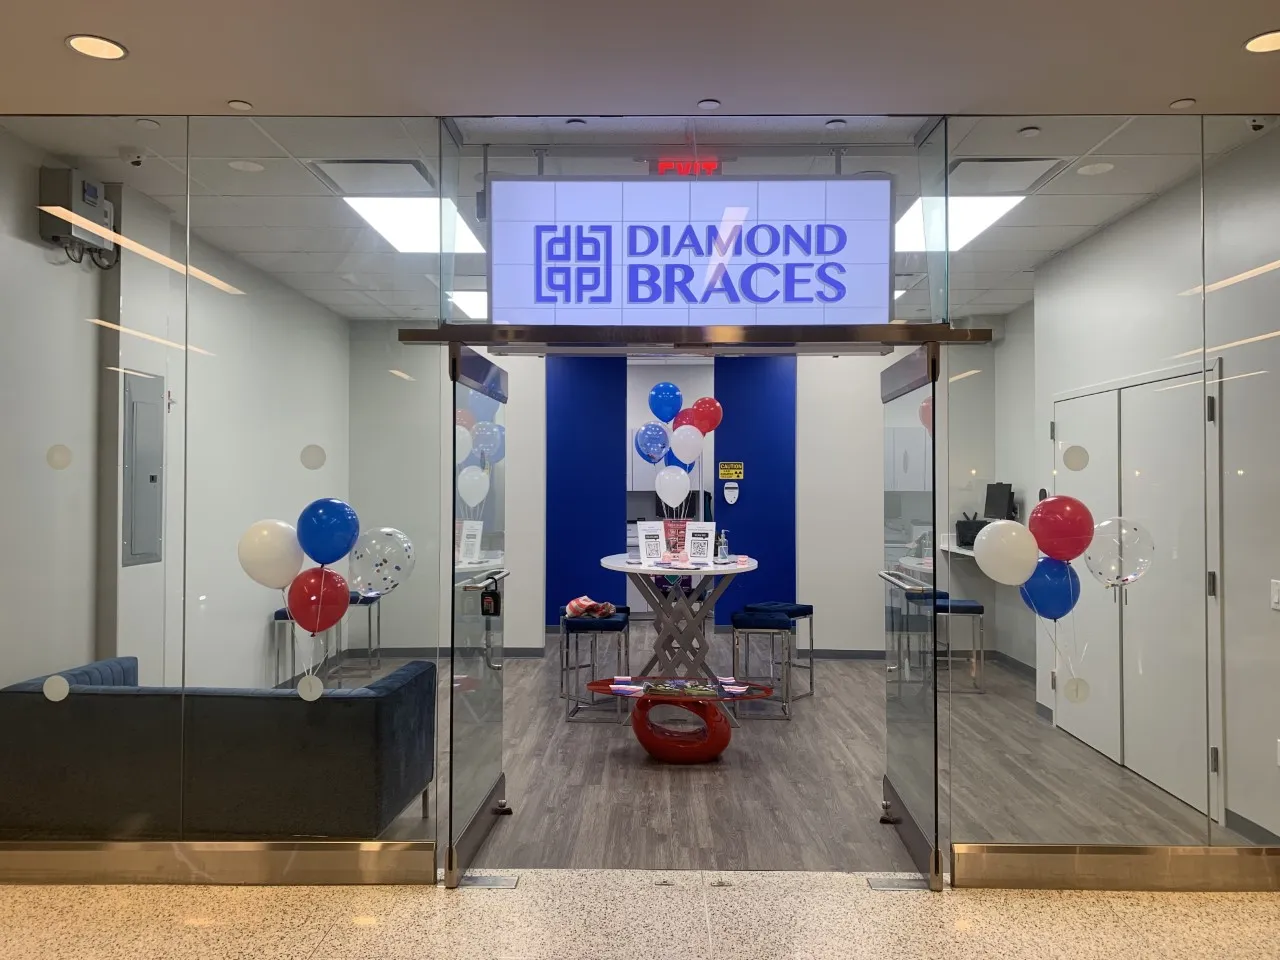 Diamond Braces Consultation and Scanning Center at NYC